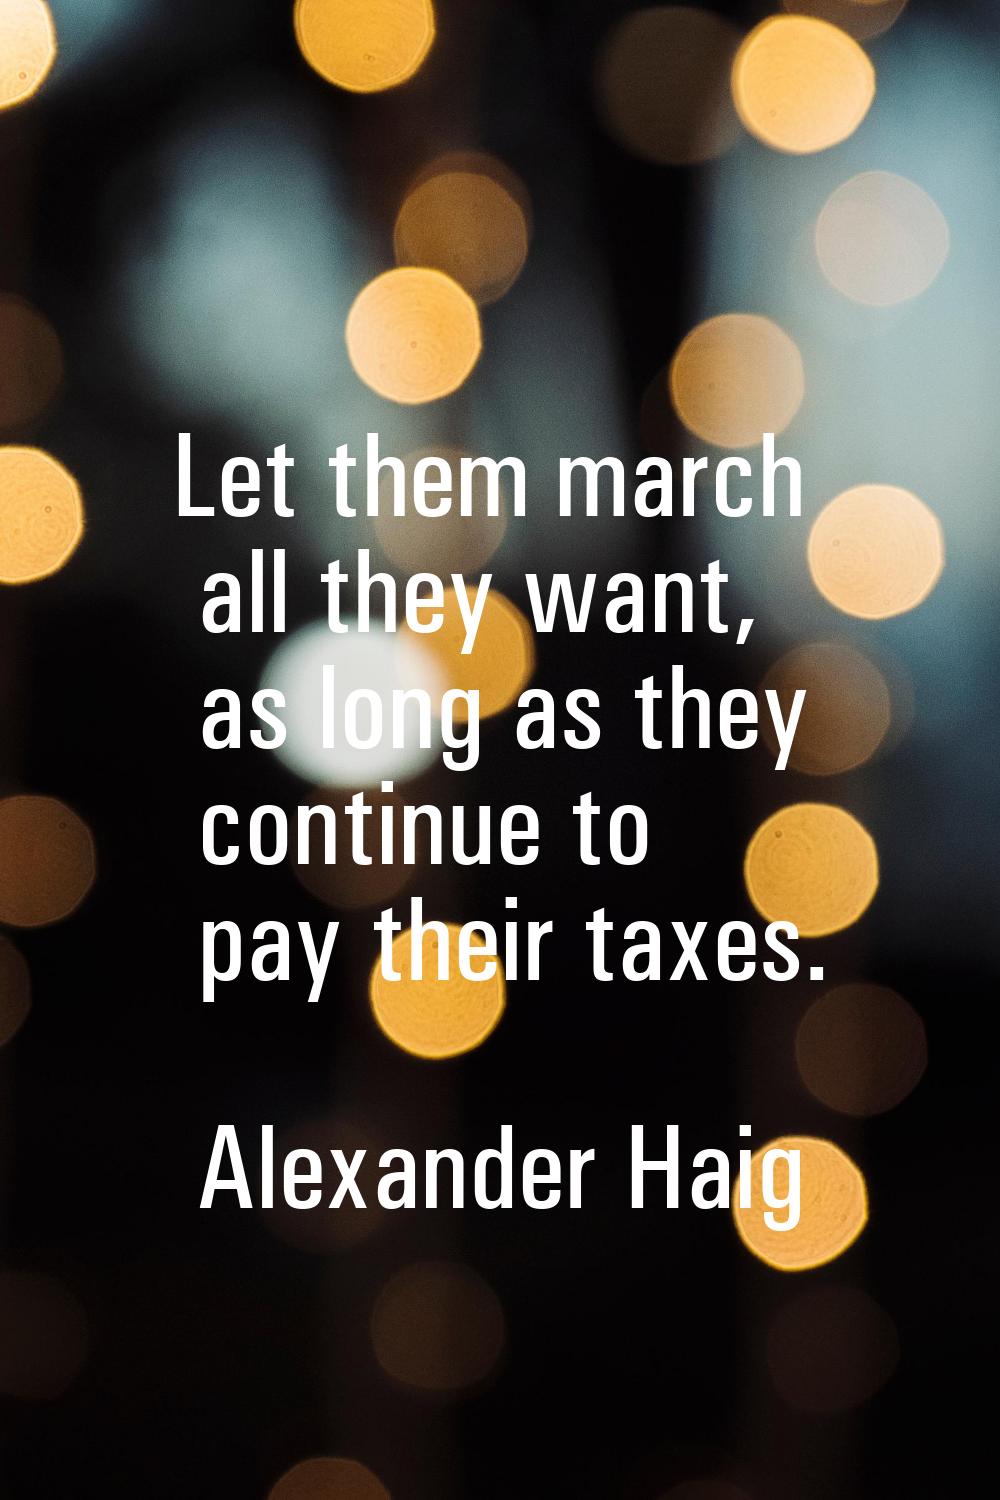 Let them march all they want, as long as they continue to pay their taxes.